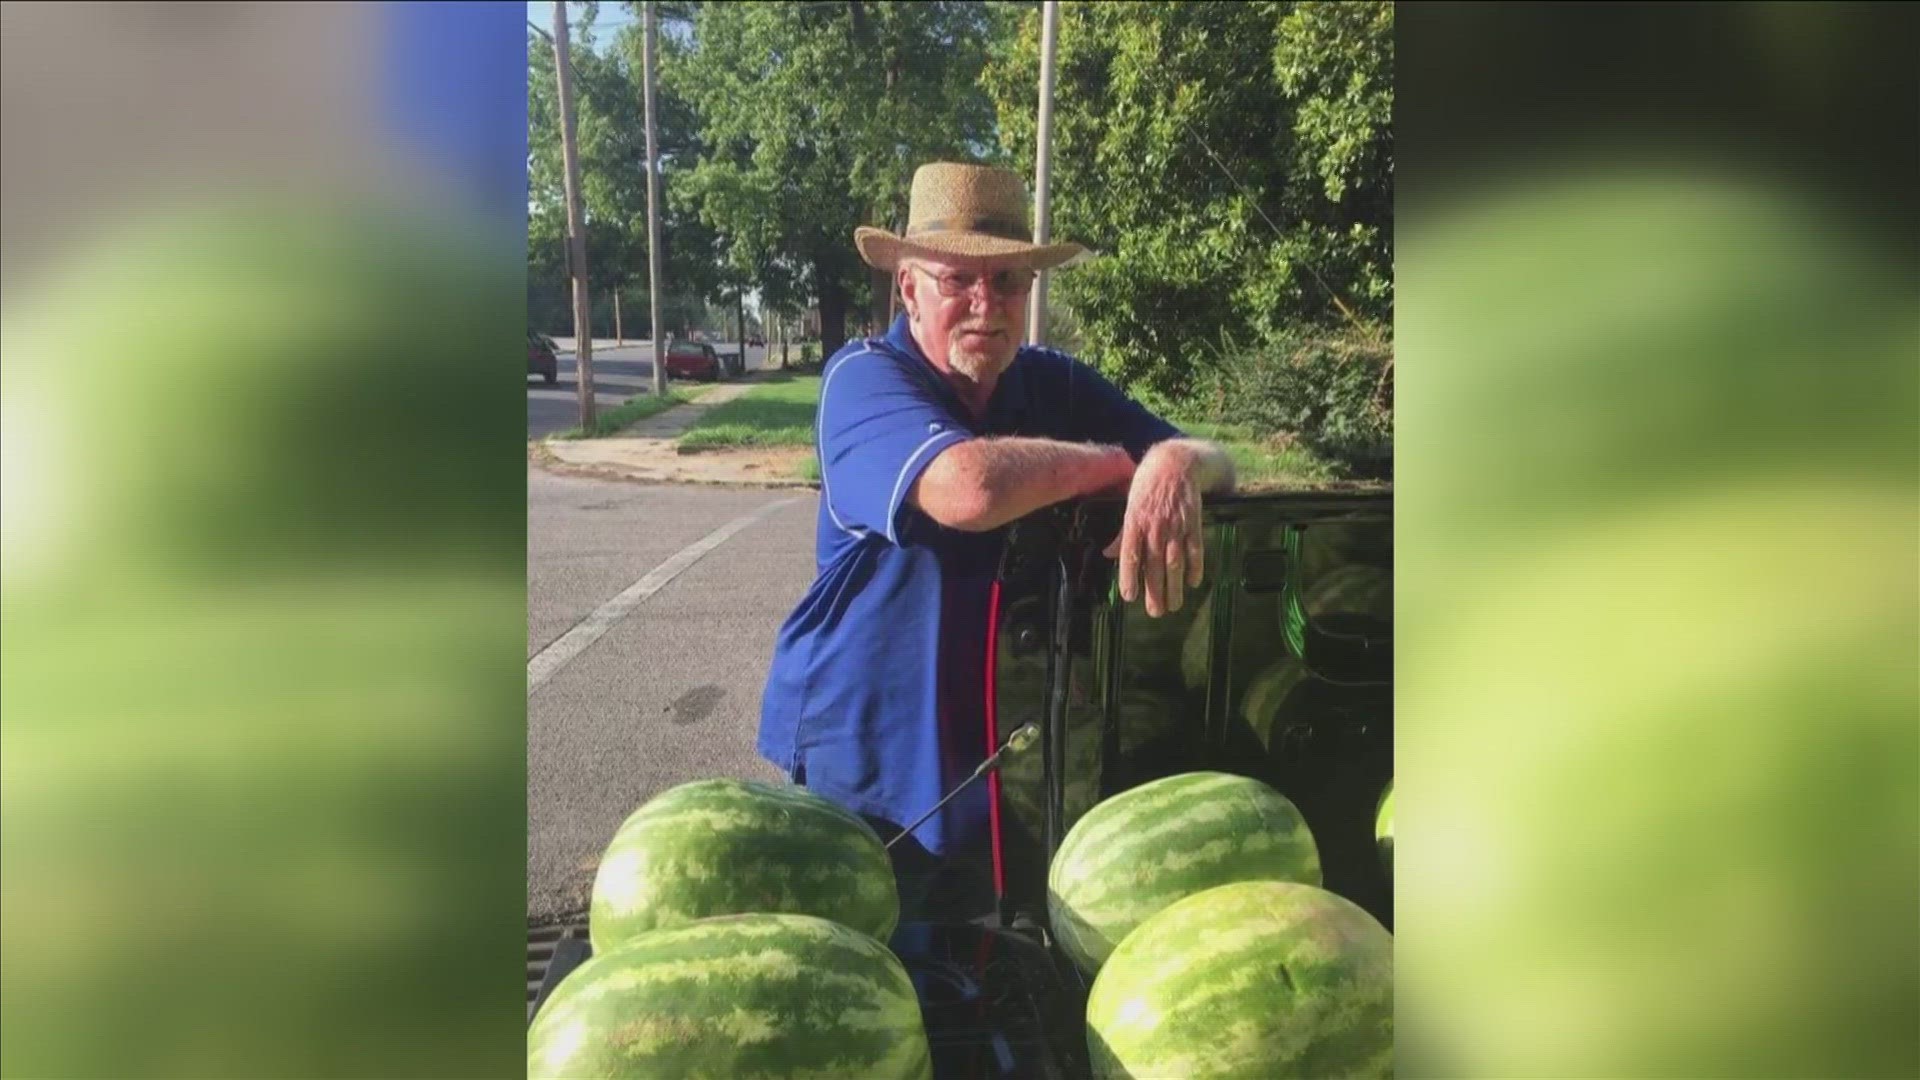 John Materna was selling watermelons out of the back of his truck when he was shot on May 15, according to the Memphis Police Department. He died two weeks later.